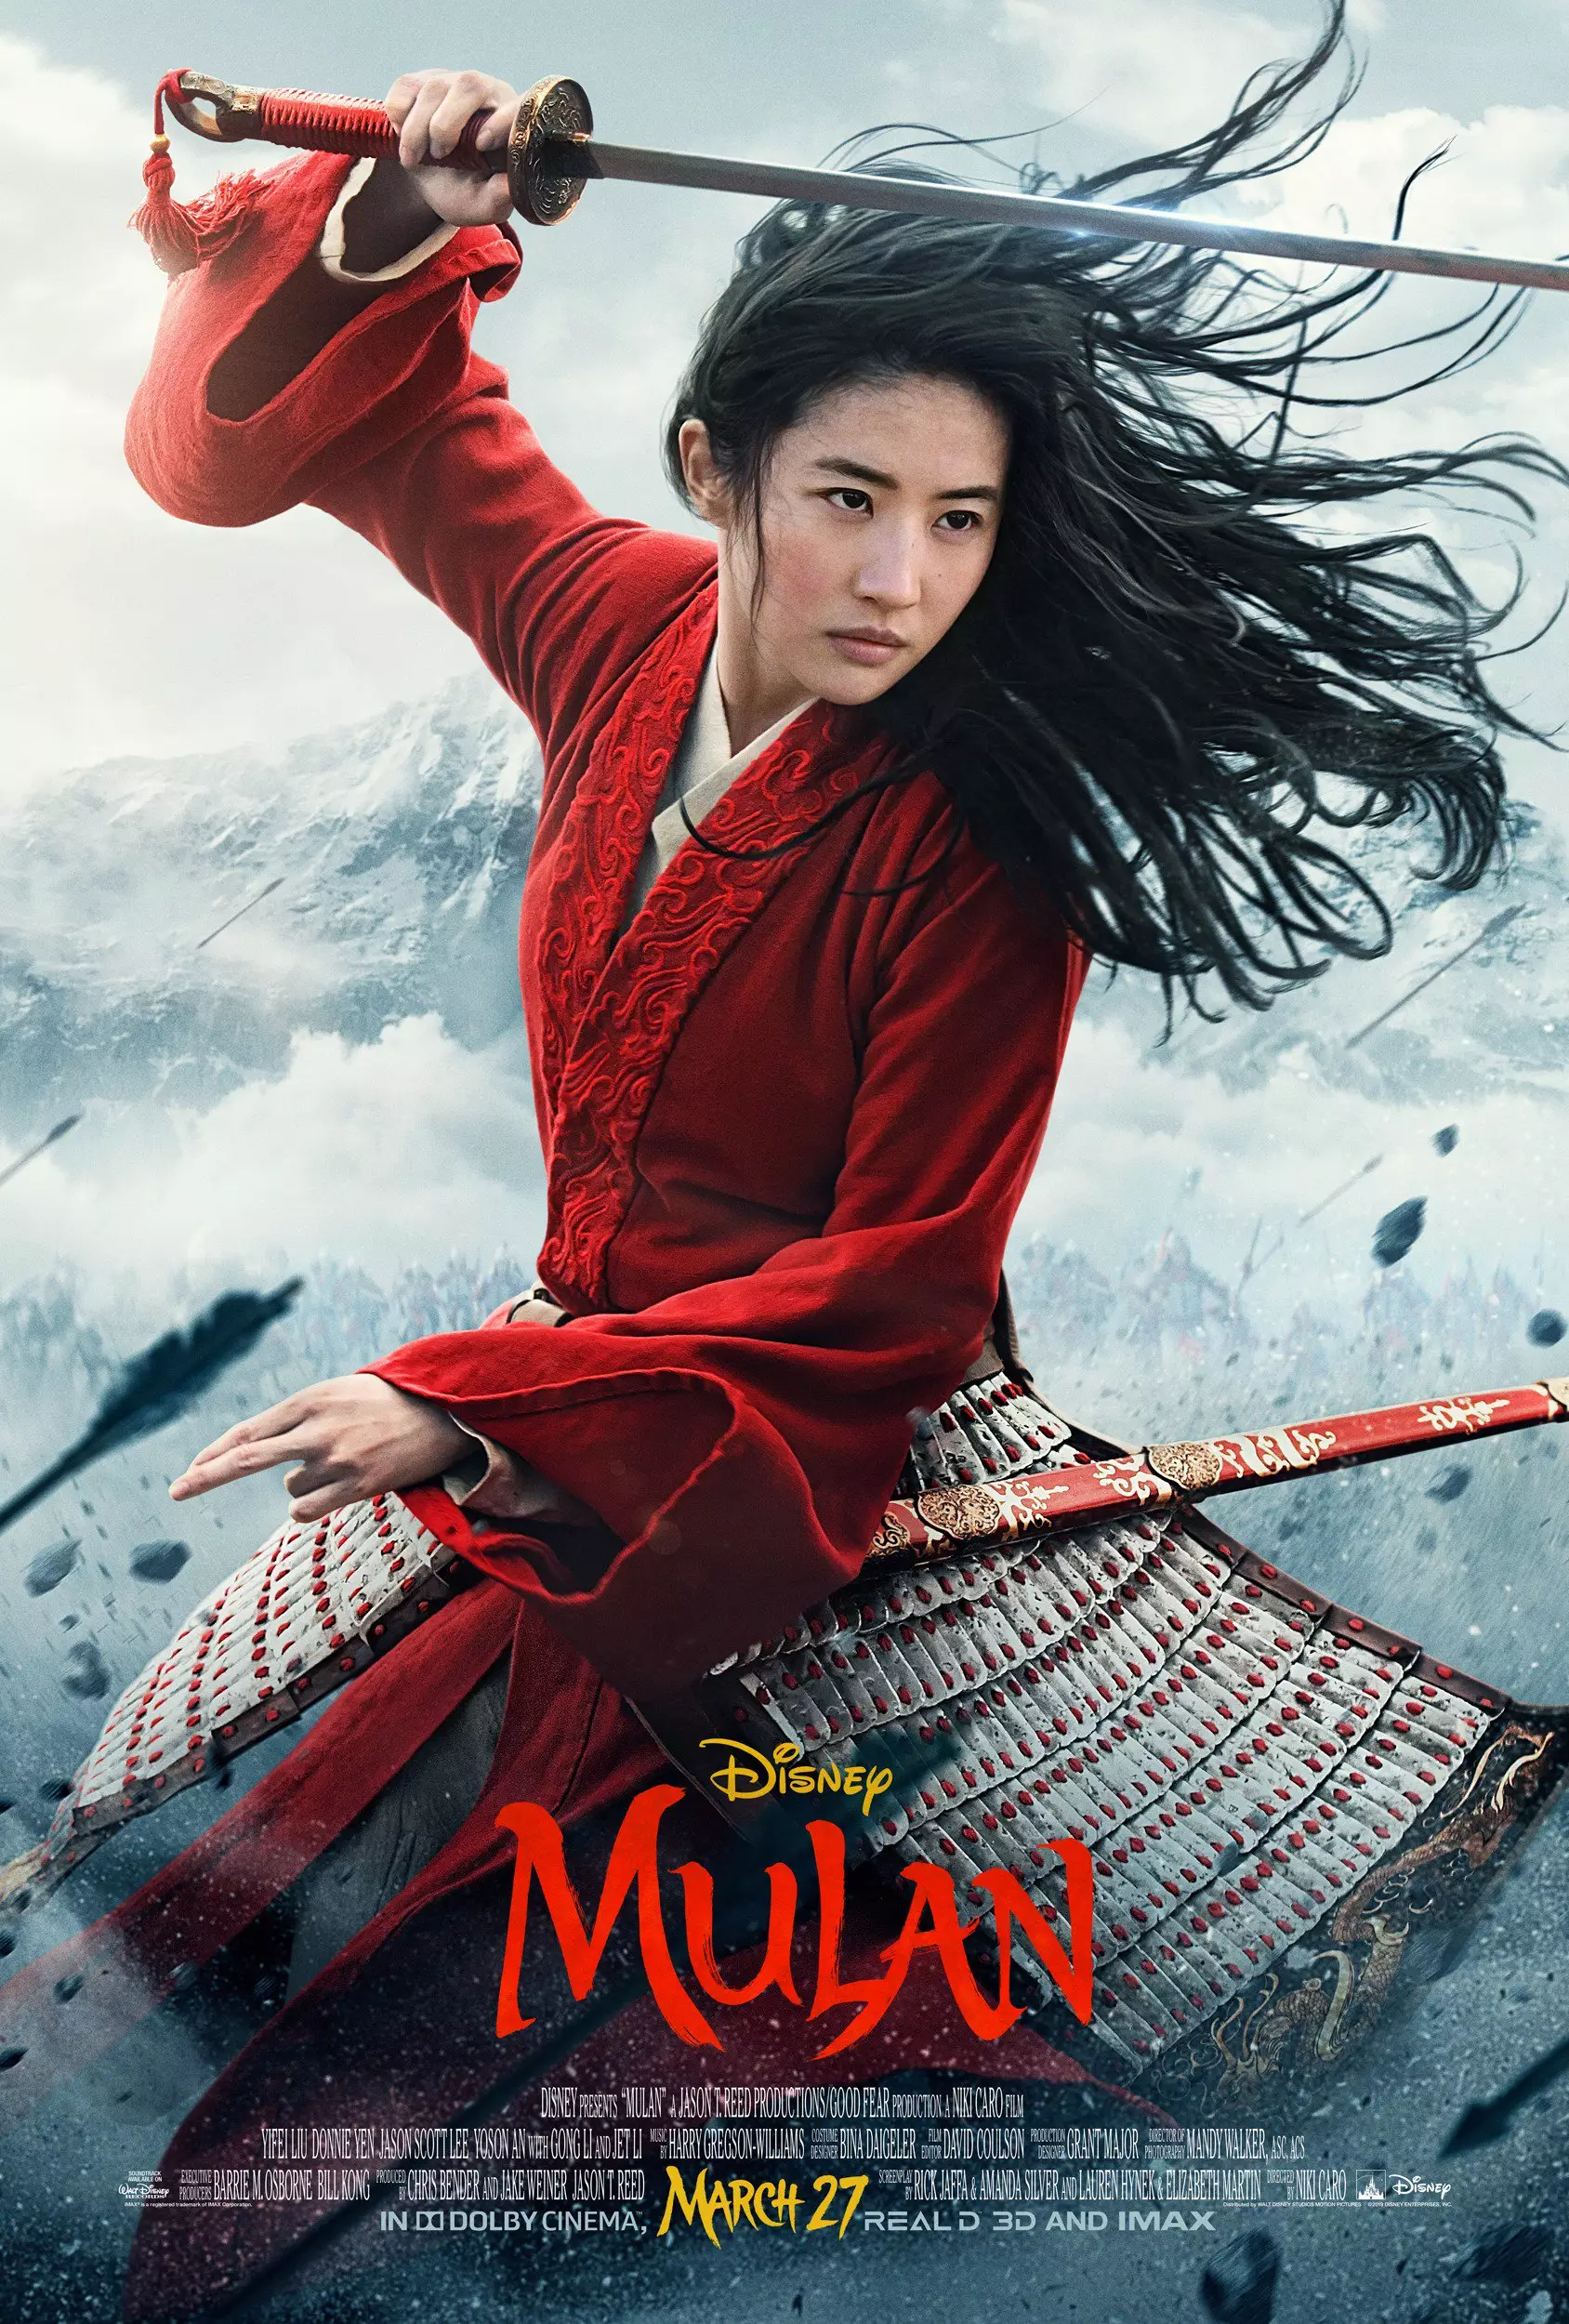 'Mulan' is set to hit theatres in 27th March 2020 (